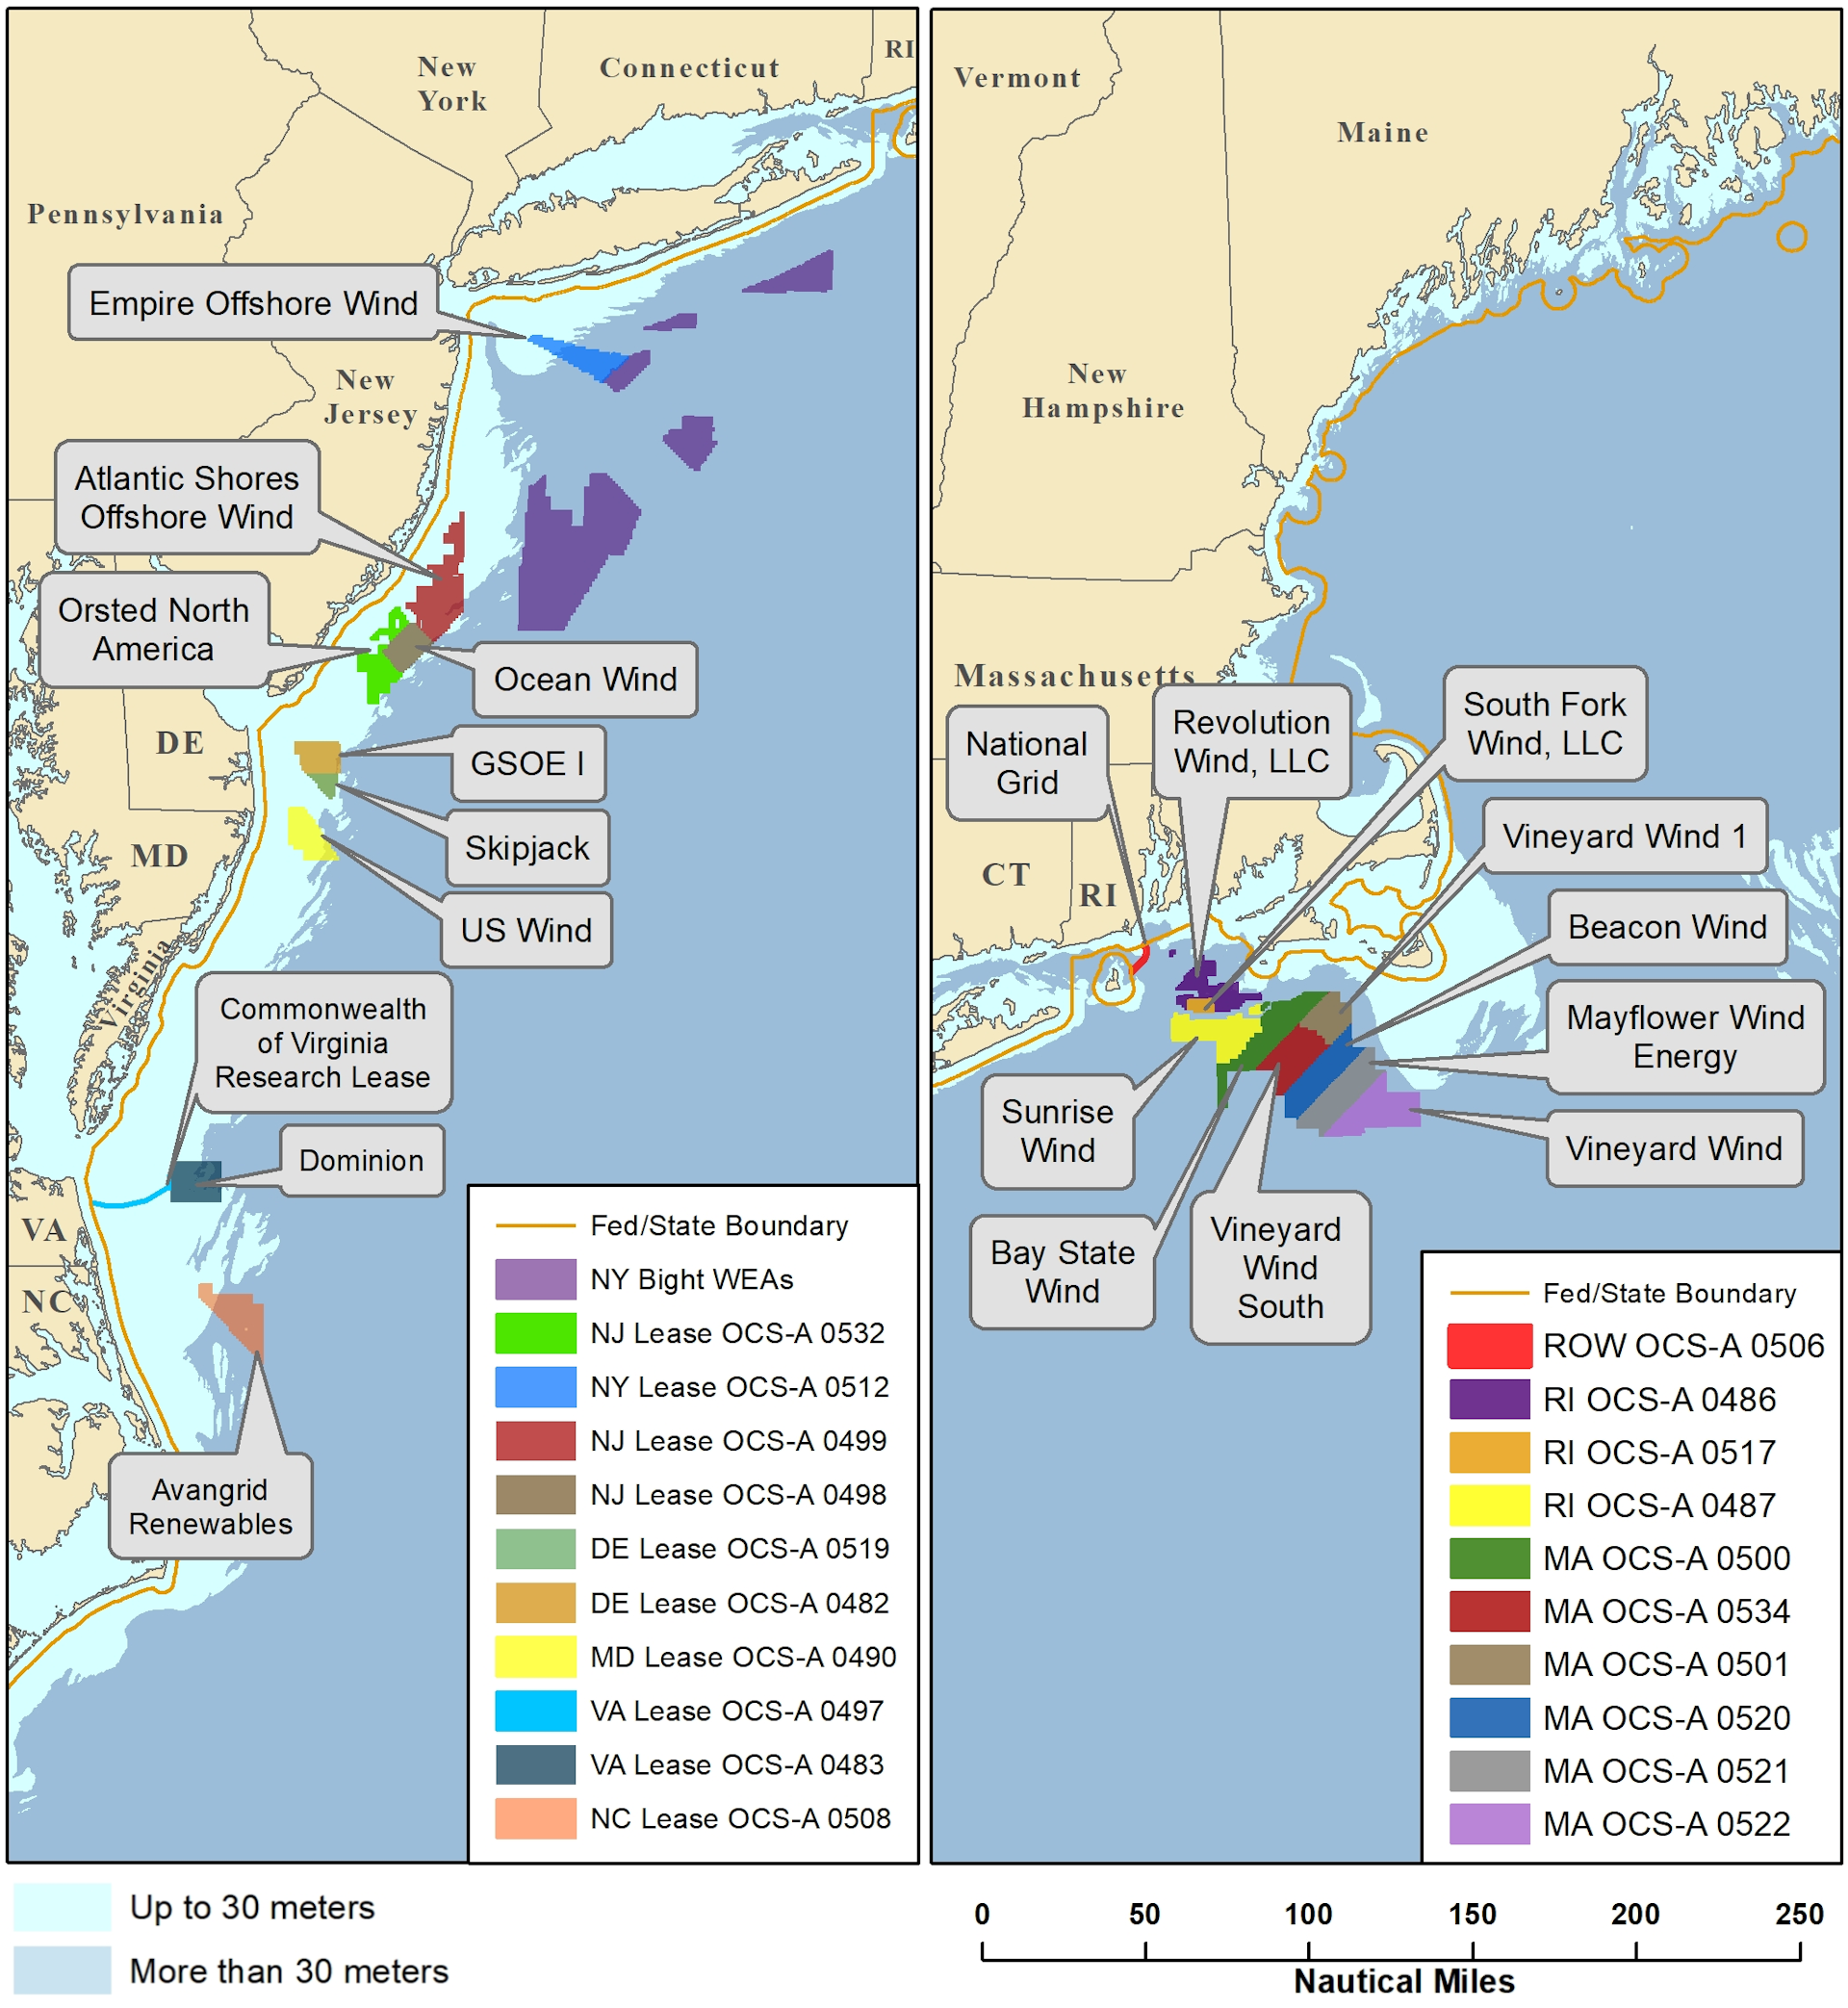 Map of US East Coast showing wind farm lease areas offshore